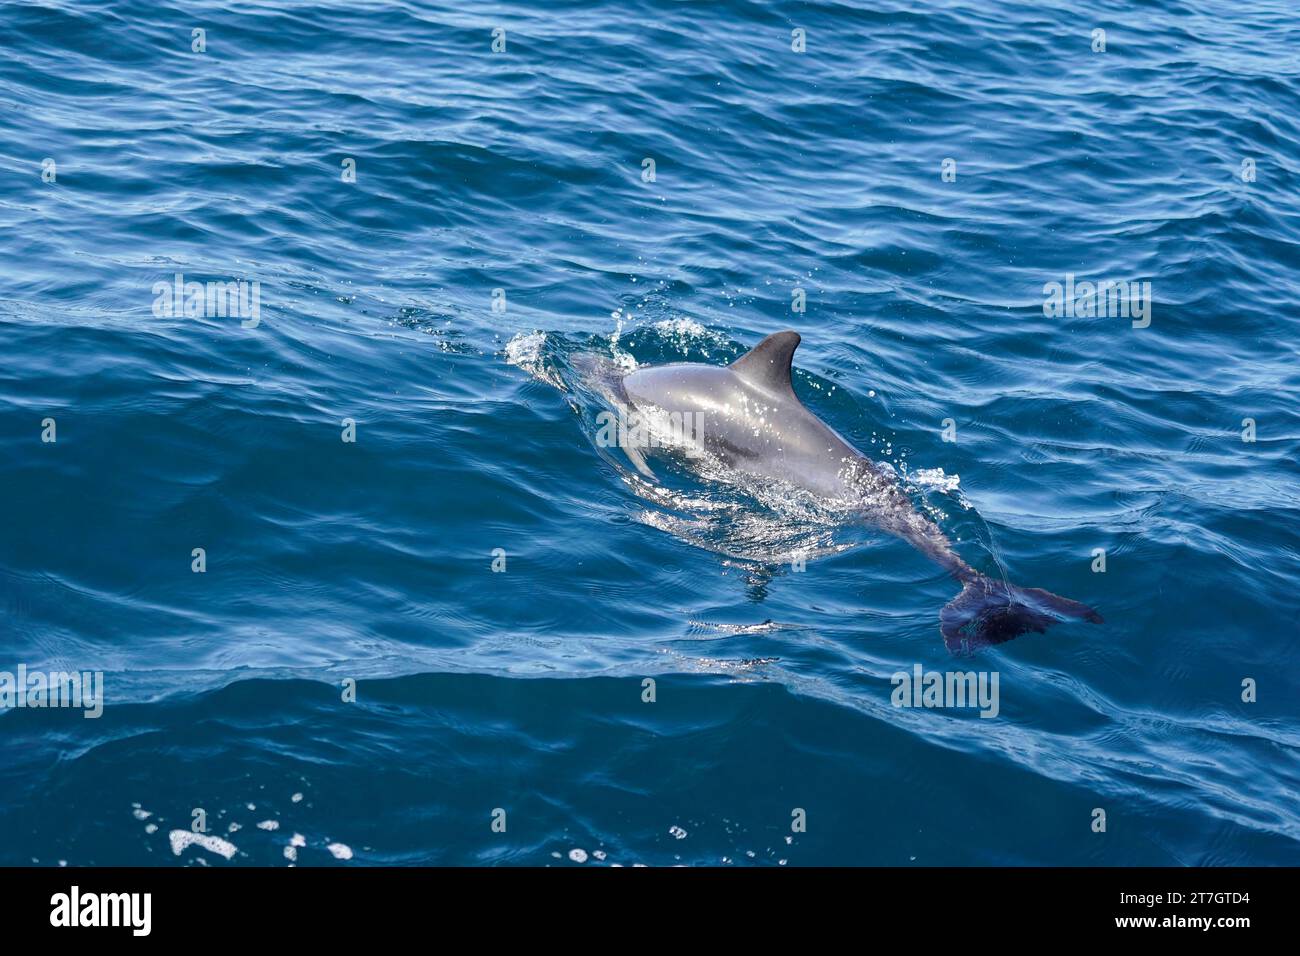 Long-beaked common dolphins (Delphinus capensis), Dolphin Watching, Atlantic Ocean, approx. 25 km from the shore, Lagos, Algarve, Portugal Stock Photo